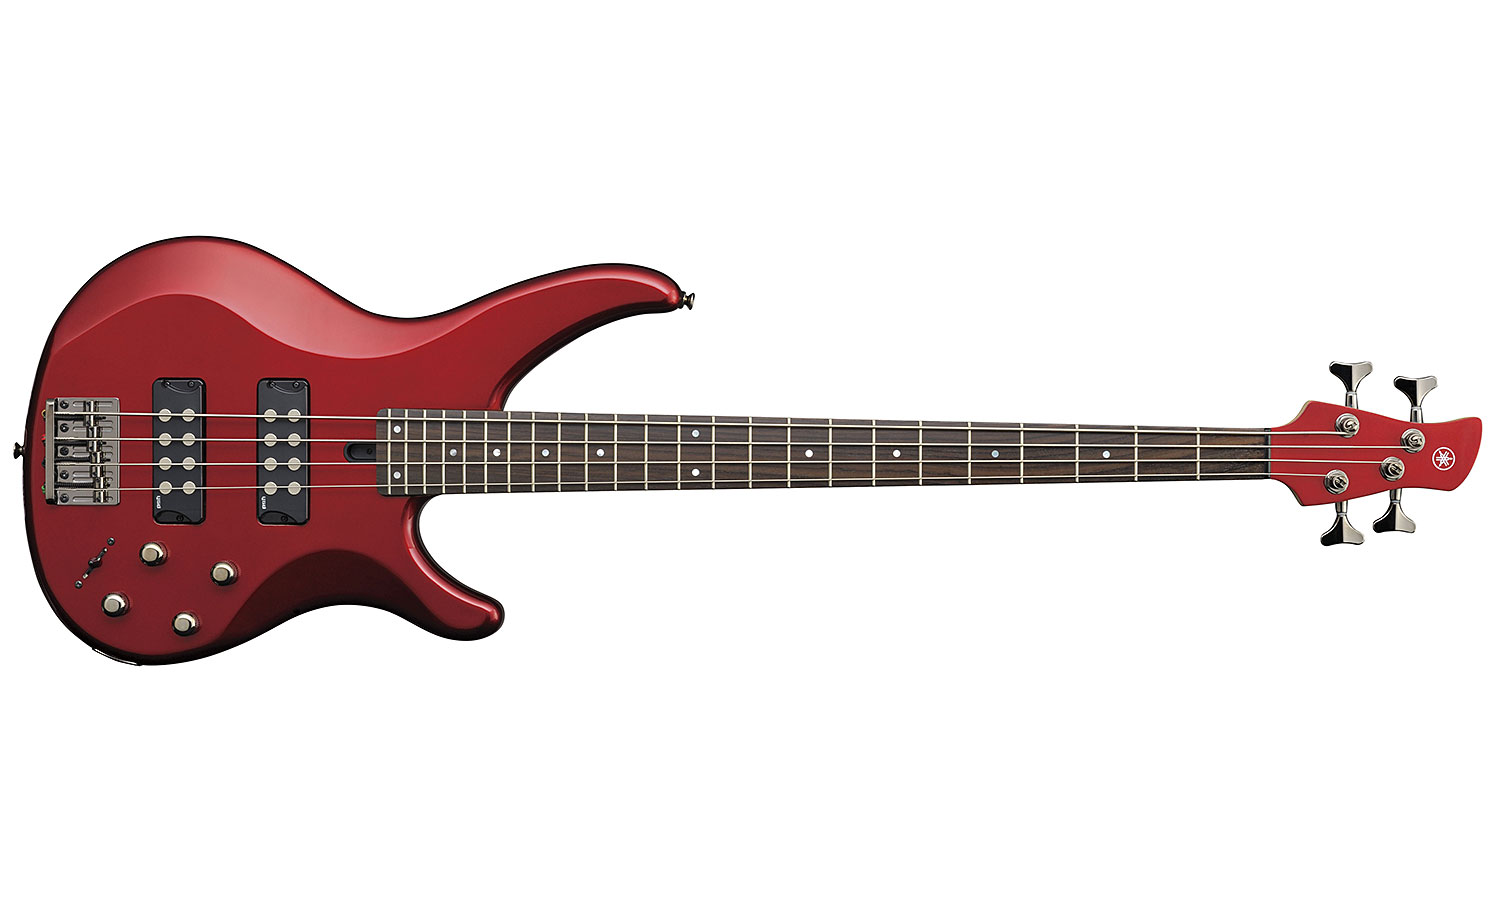 Yamaha Trbx304 Car - Candy Apple Red - Solid body electric bass - Variation 1